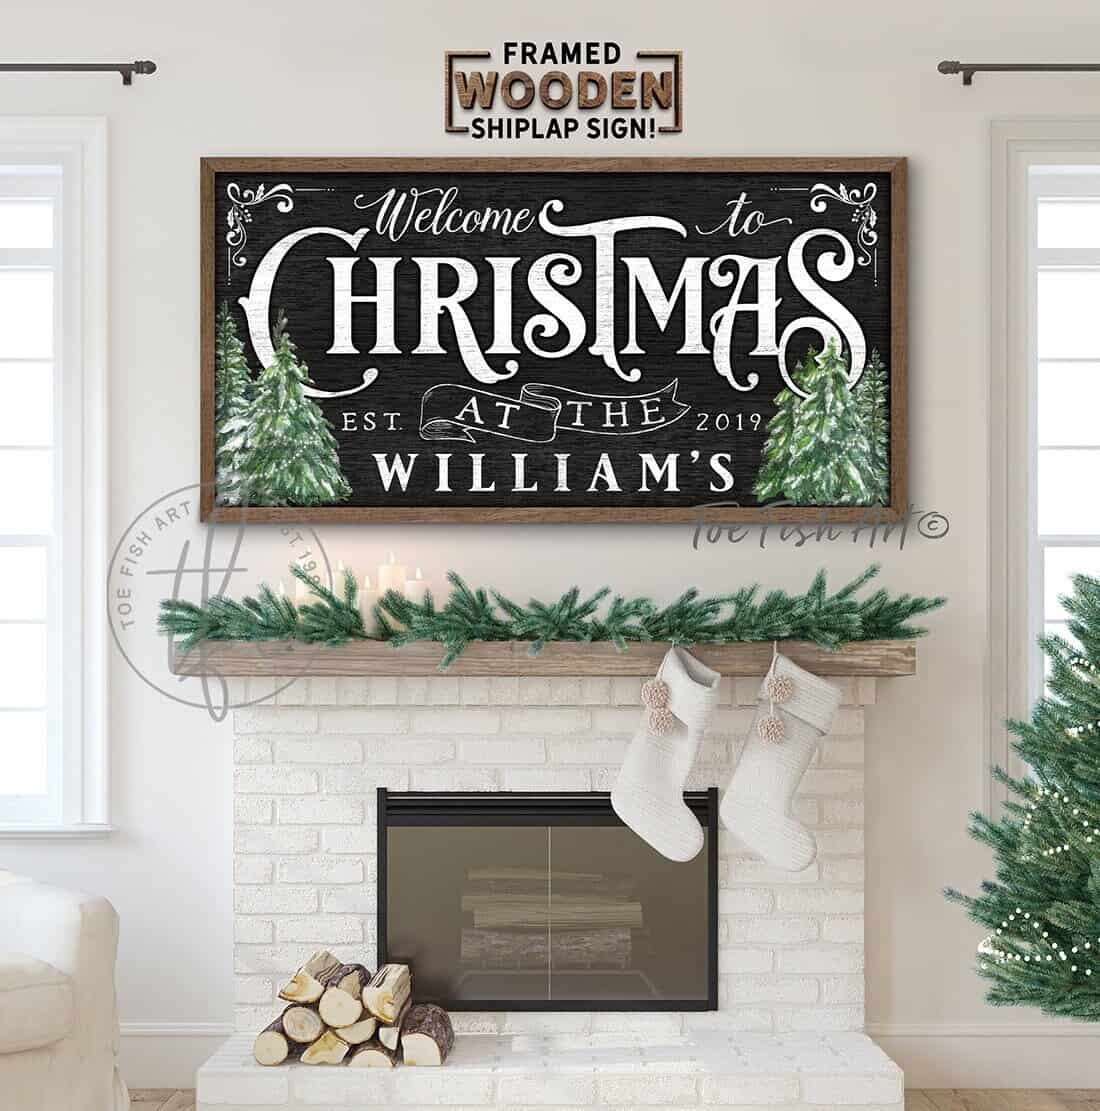 https://toefishart.com/wp-content/uploads/2023/02/Welcome-To-Christmas-Personalized-Family-Name-Sign-in-Vintage-Black-White-Style-Framed-Hardwood-Shiplap-Holiday-Decoration-1363282205.jpg